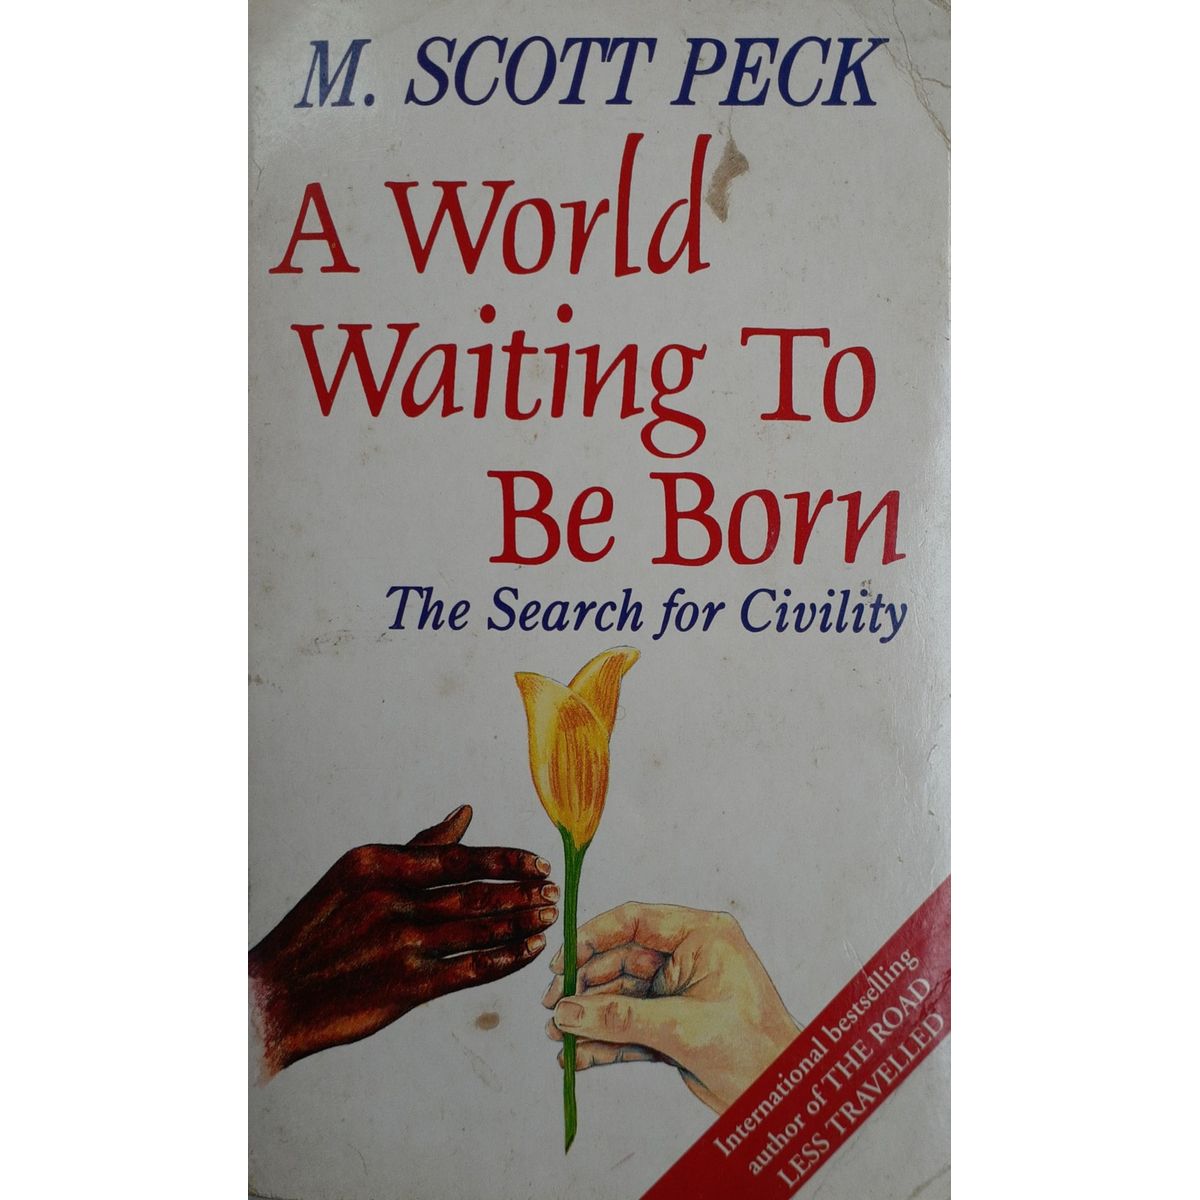 ISBN: 9780099328216 / 0099328216 - A World Waiting to Be Born: The Search for Civility by M Scott Peck [1994]